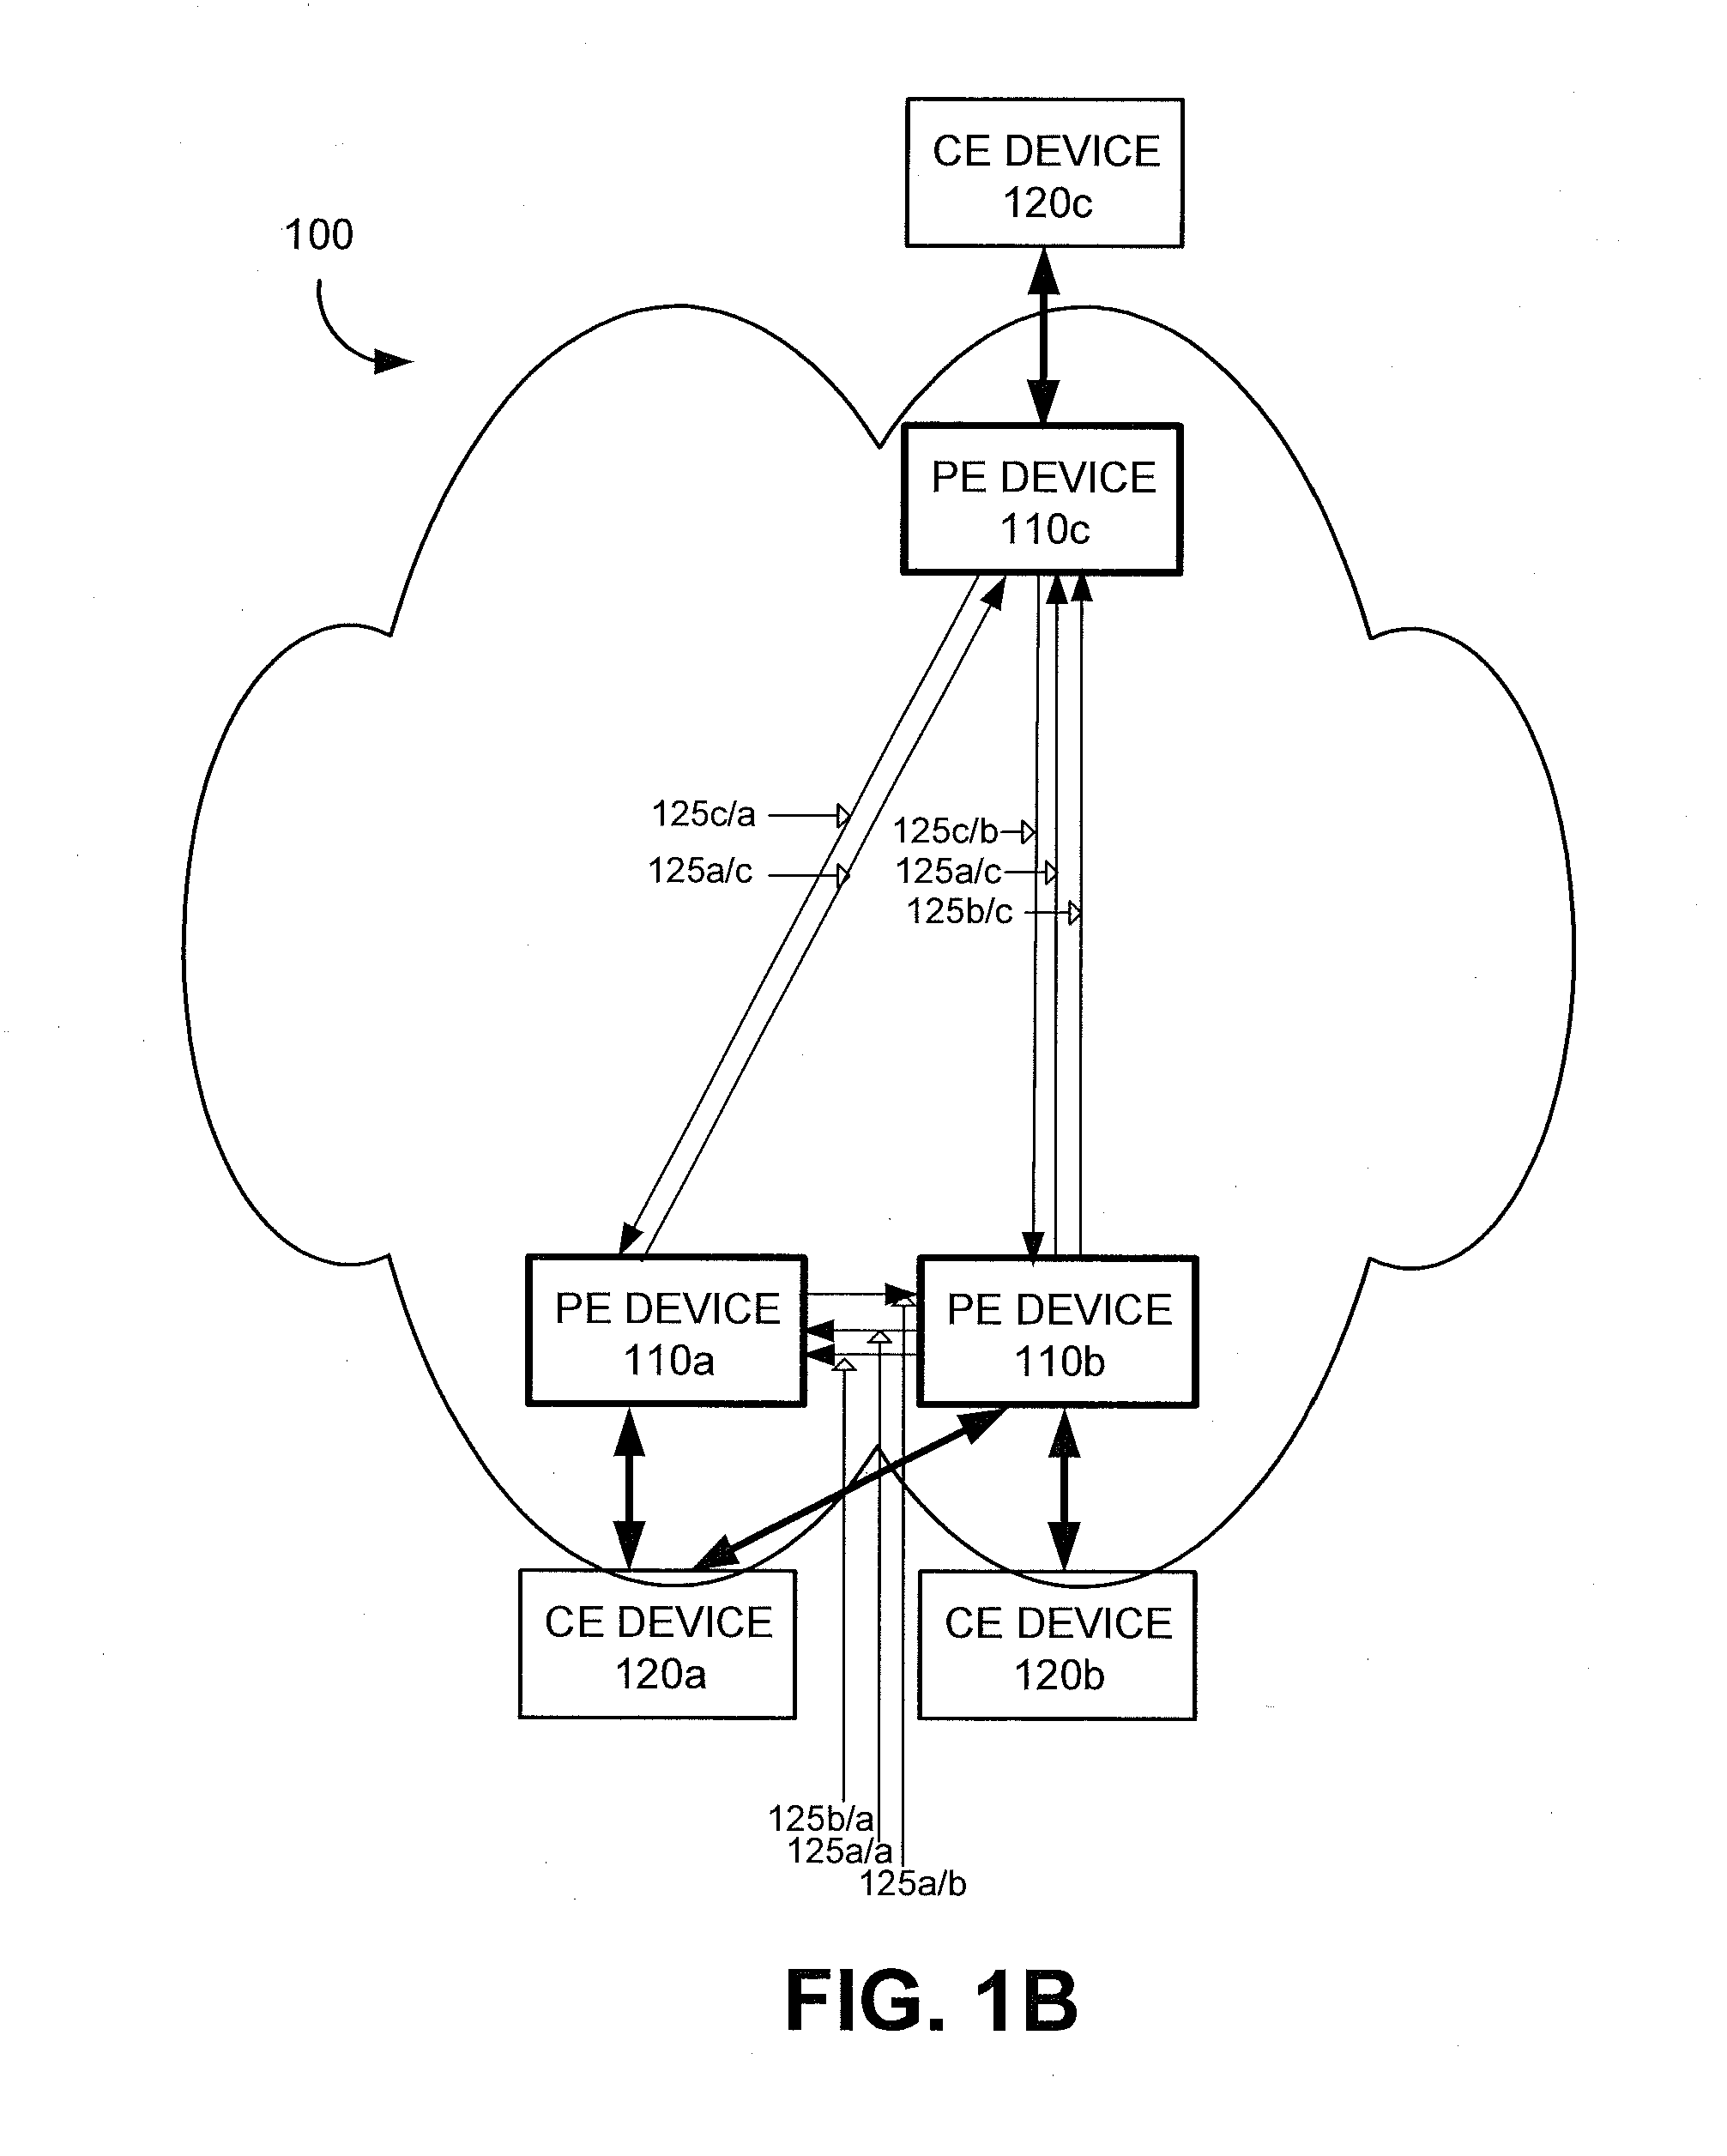 Systems and methods for equal-cost multi-path virtual private LAN service